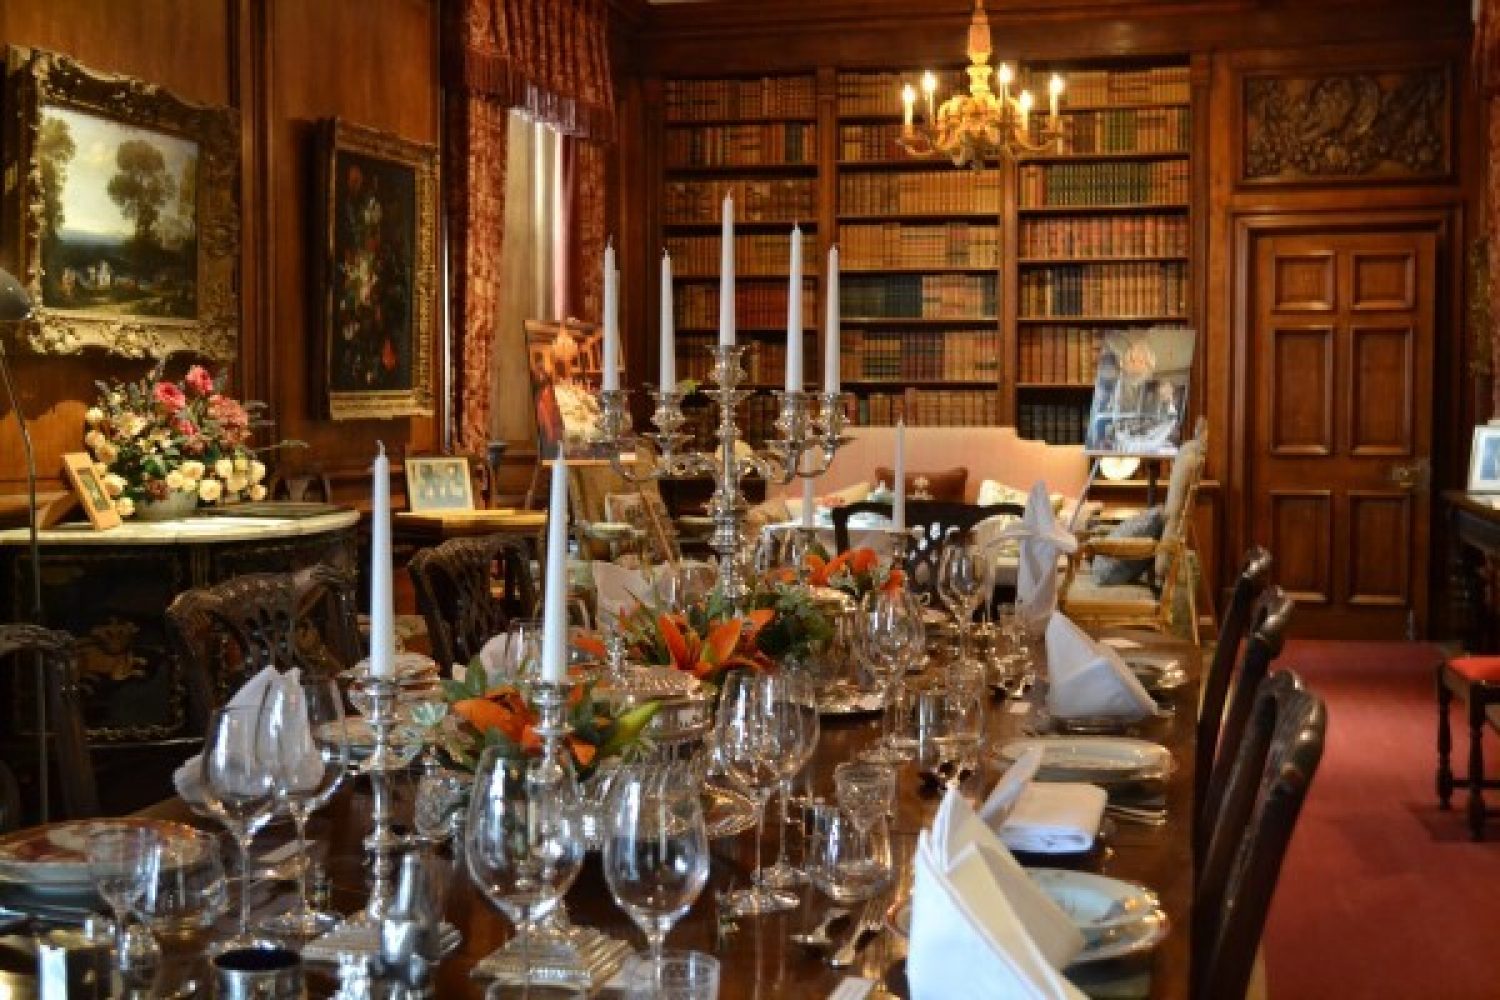 Interior shot of a banquet table in the library room at Sudeley Castle